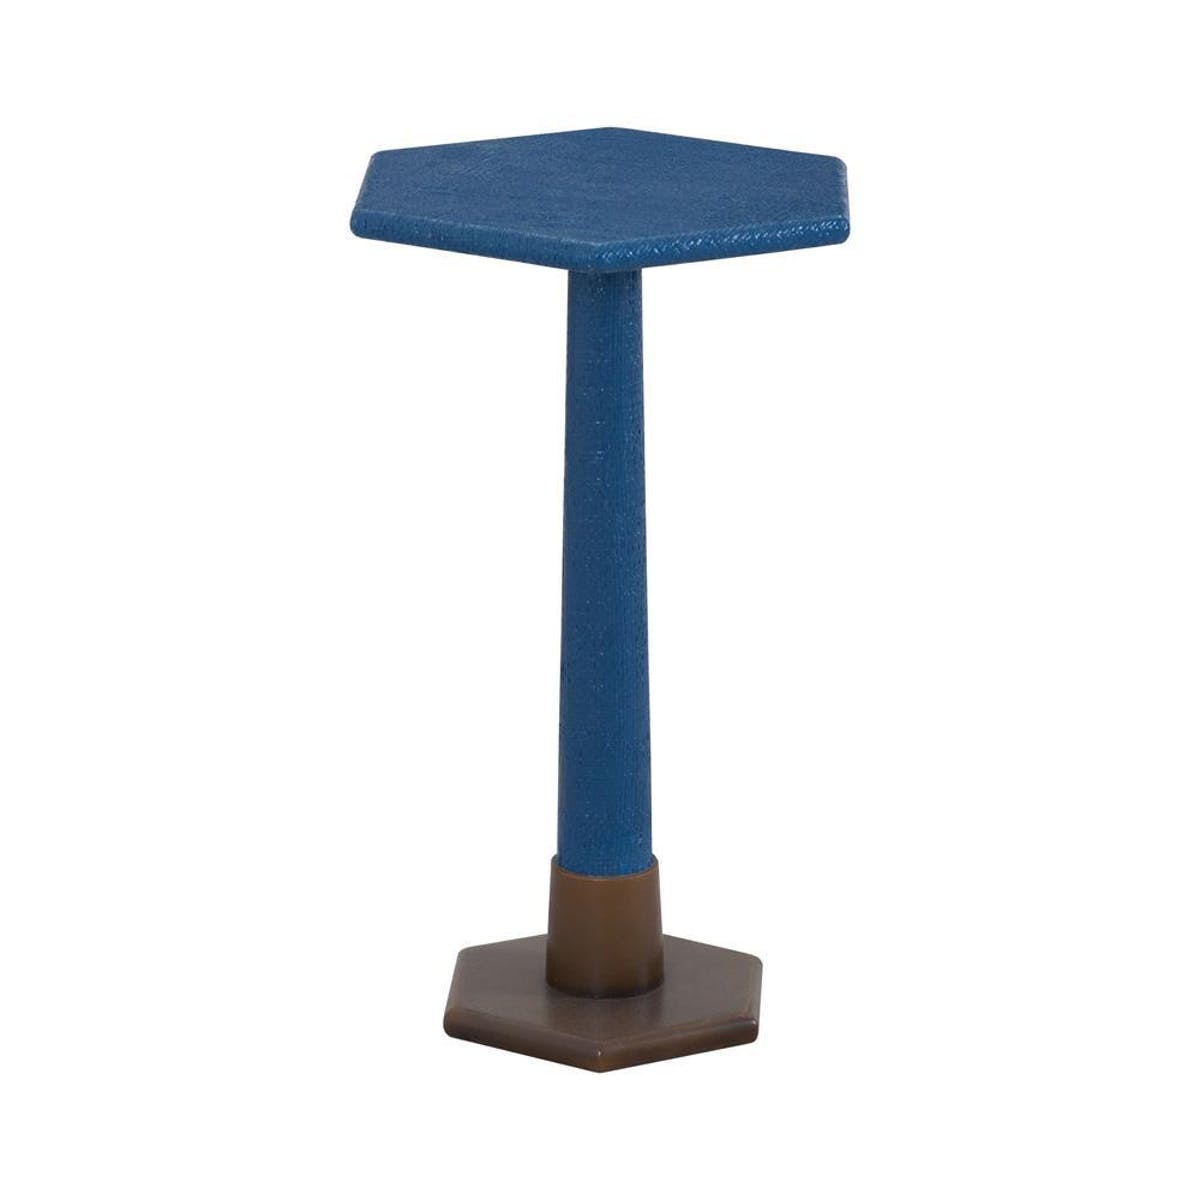 sterling industries launch pad navy blue accent table modish tap expand cocktail sets small mosaic side sage green bedside cool coffee ideas lucite mini modern baroque inch round